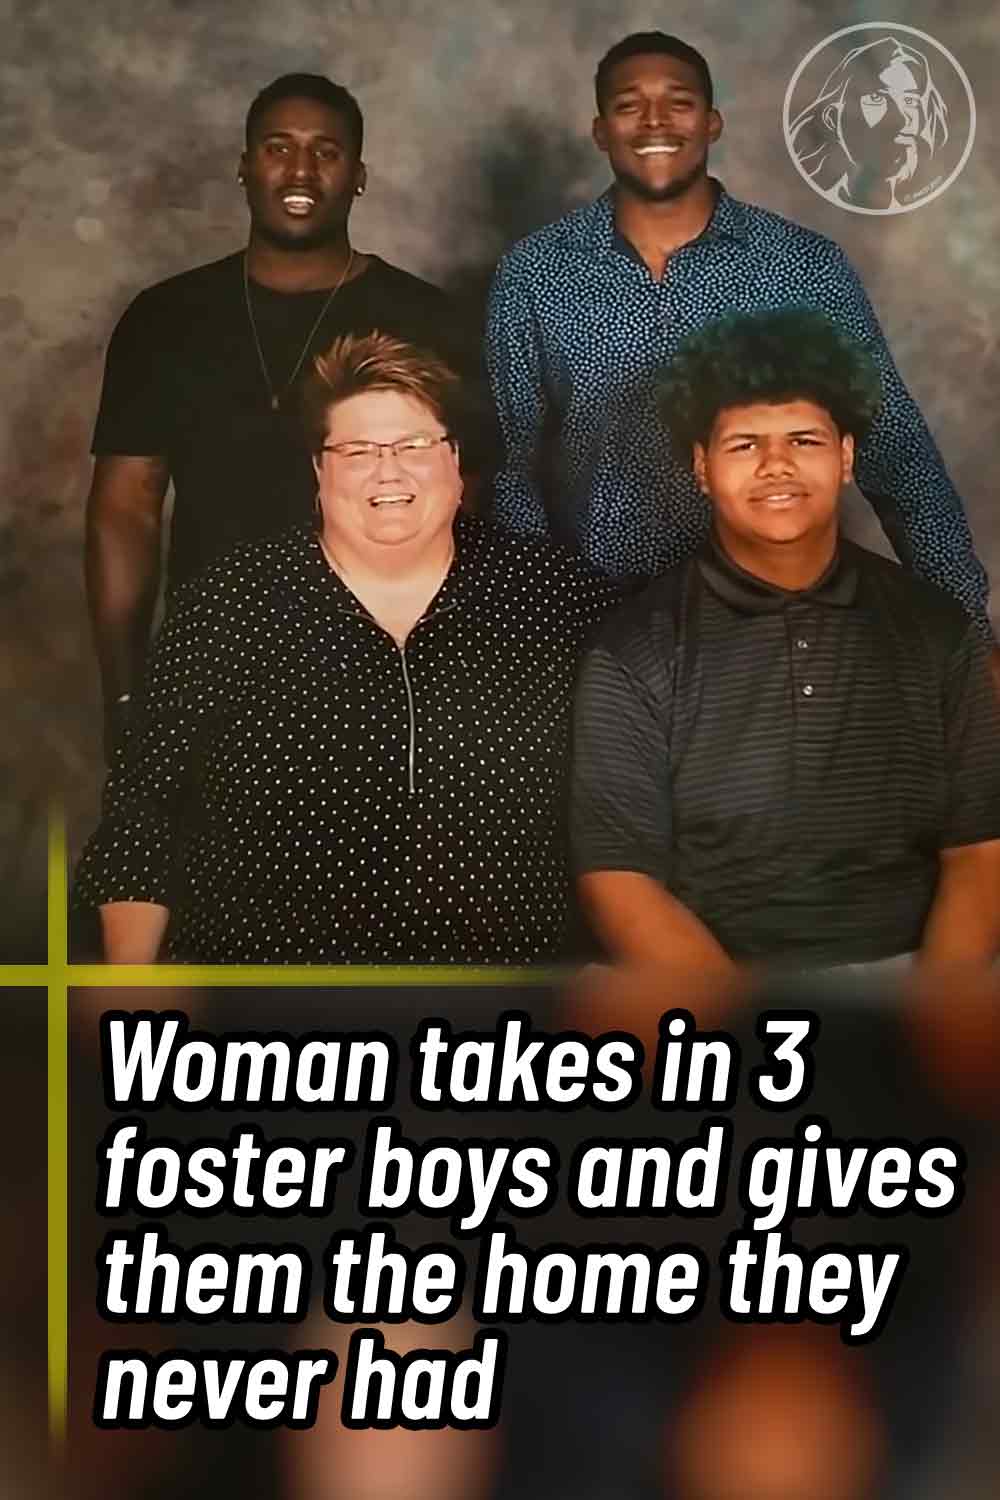 Woman takes in 3 foster boys and gives them the home they never had